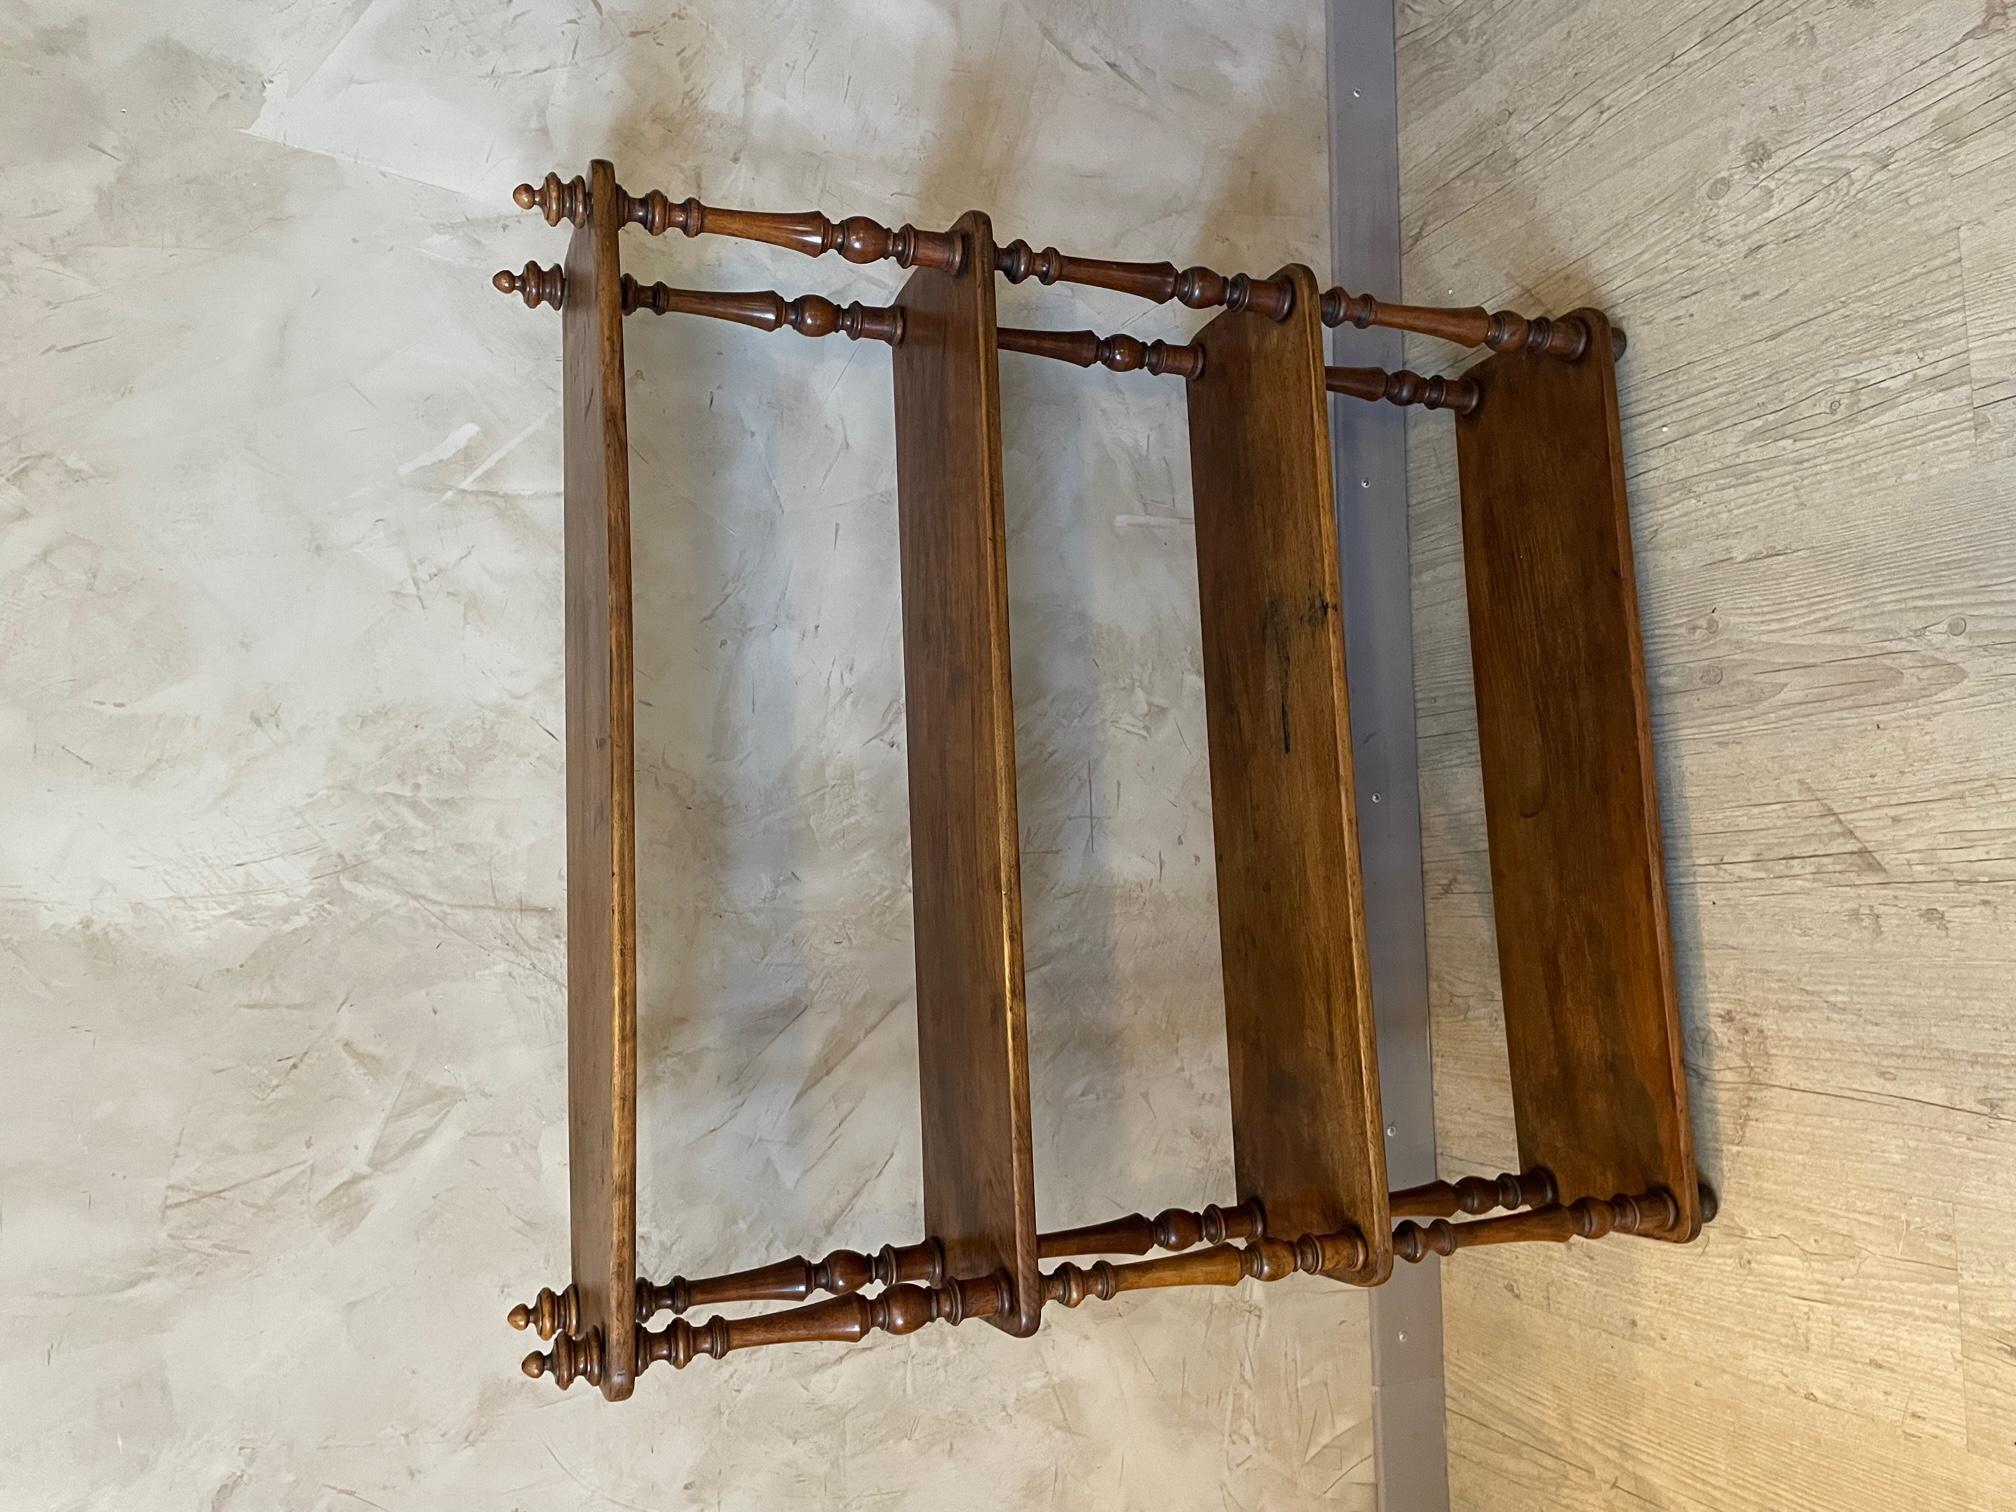 Very nice early 20th century French walnut shelf on foot. Good quality and condition.